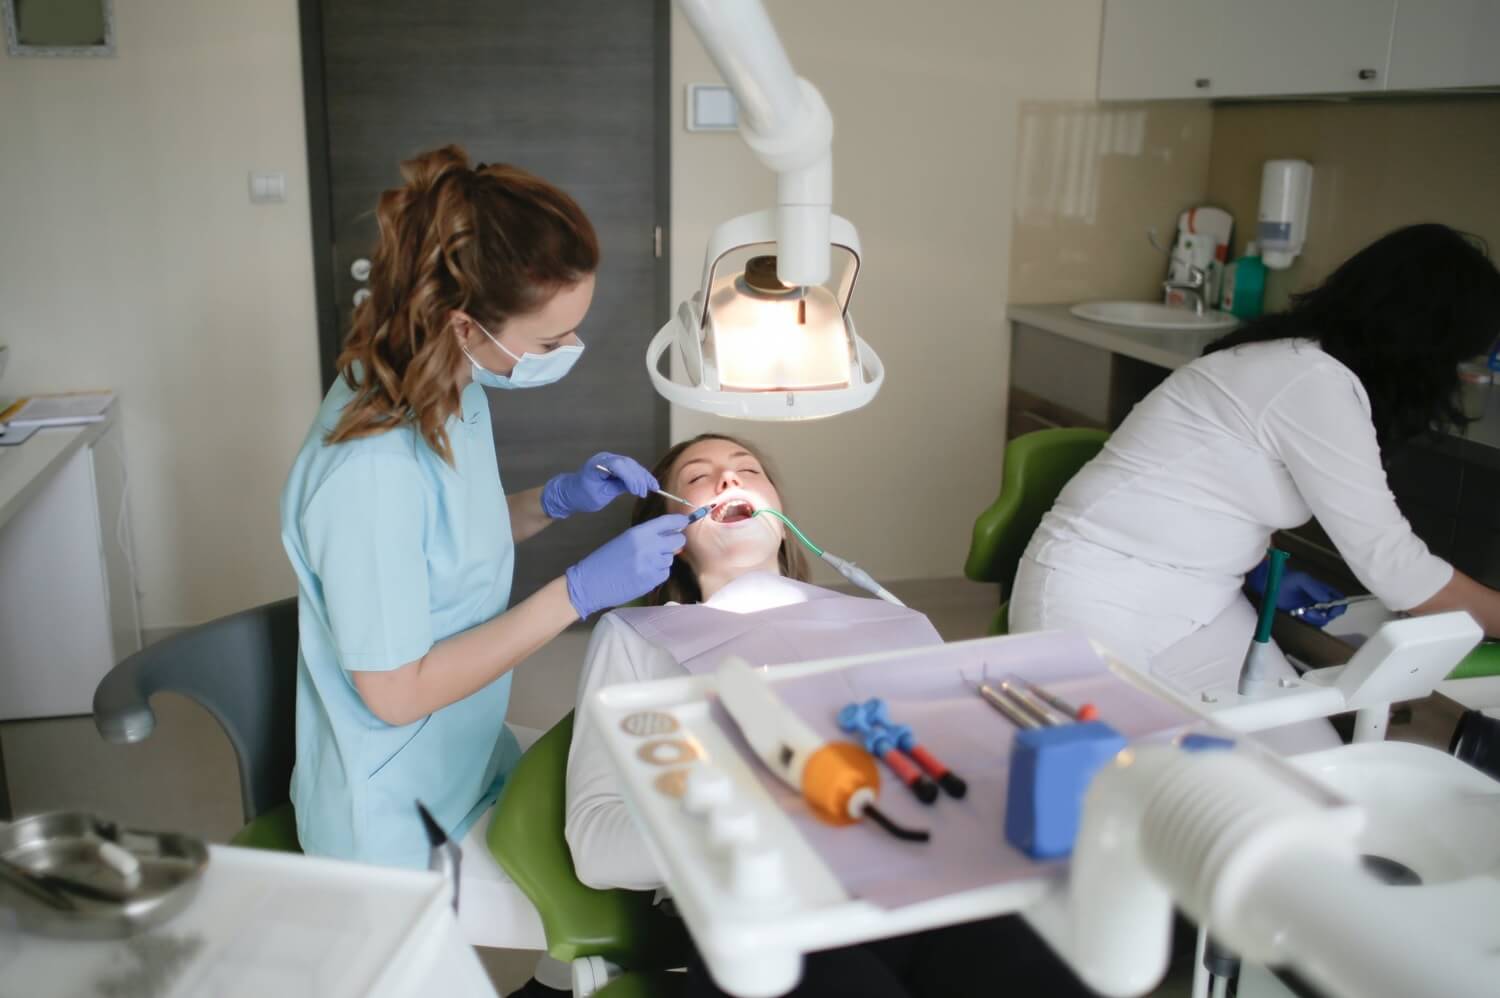 6 Important factors to consider when choosing a dentist | News | Dentagama